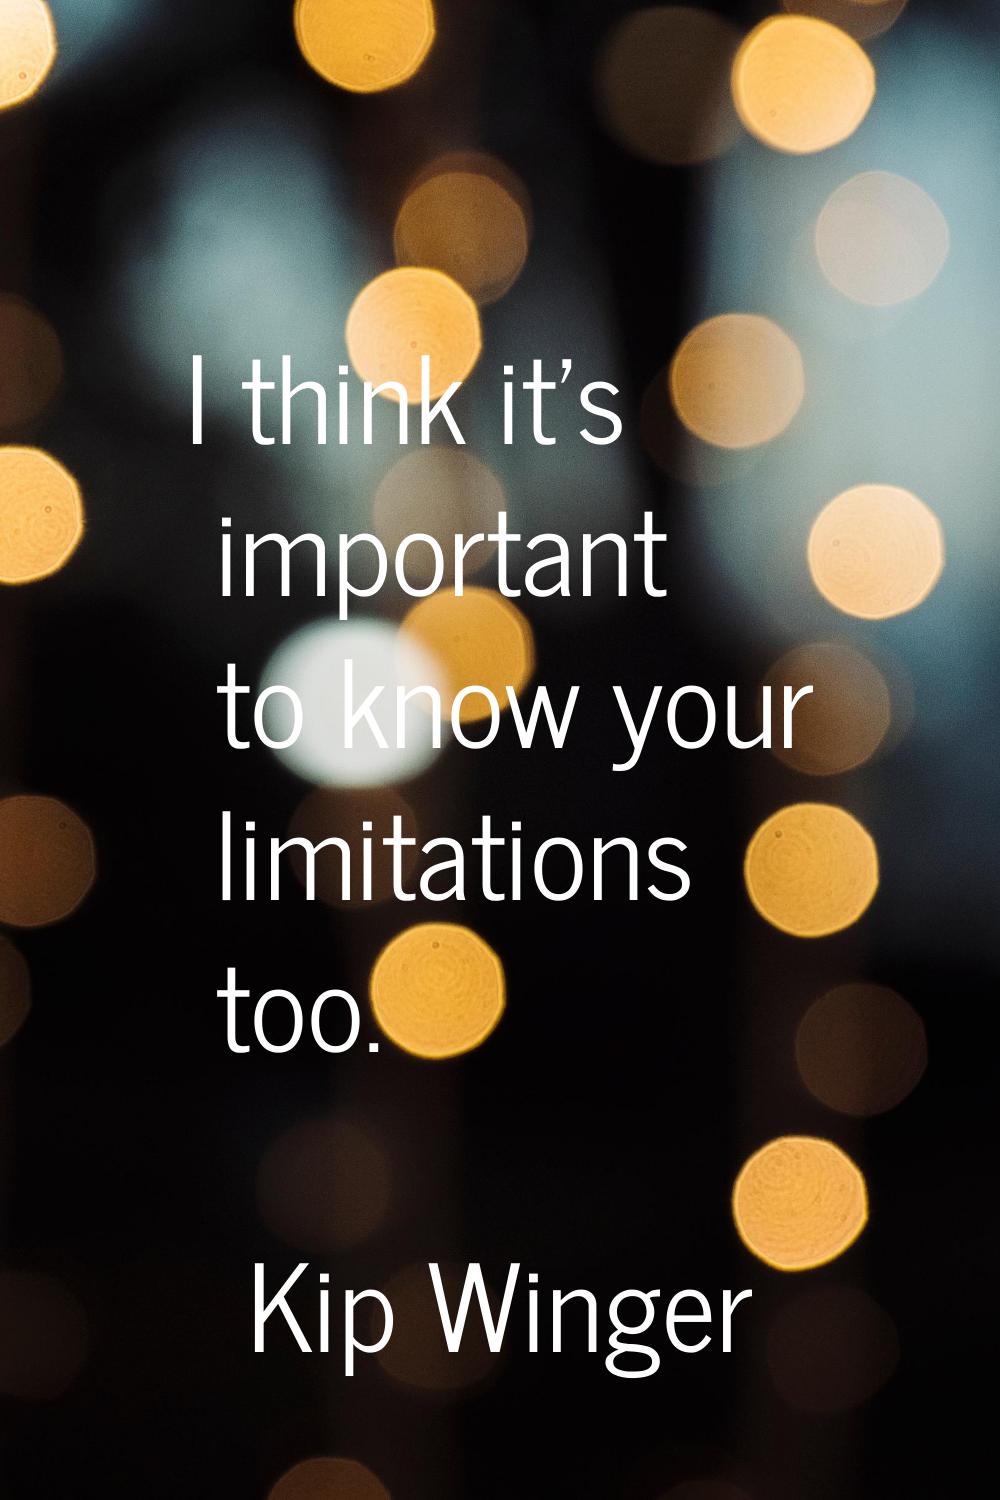 I think it's important to know your limitations too.